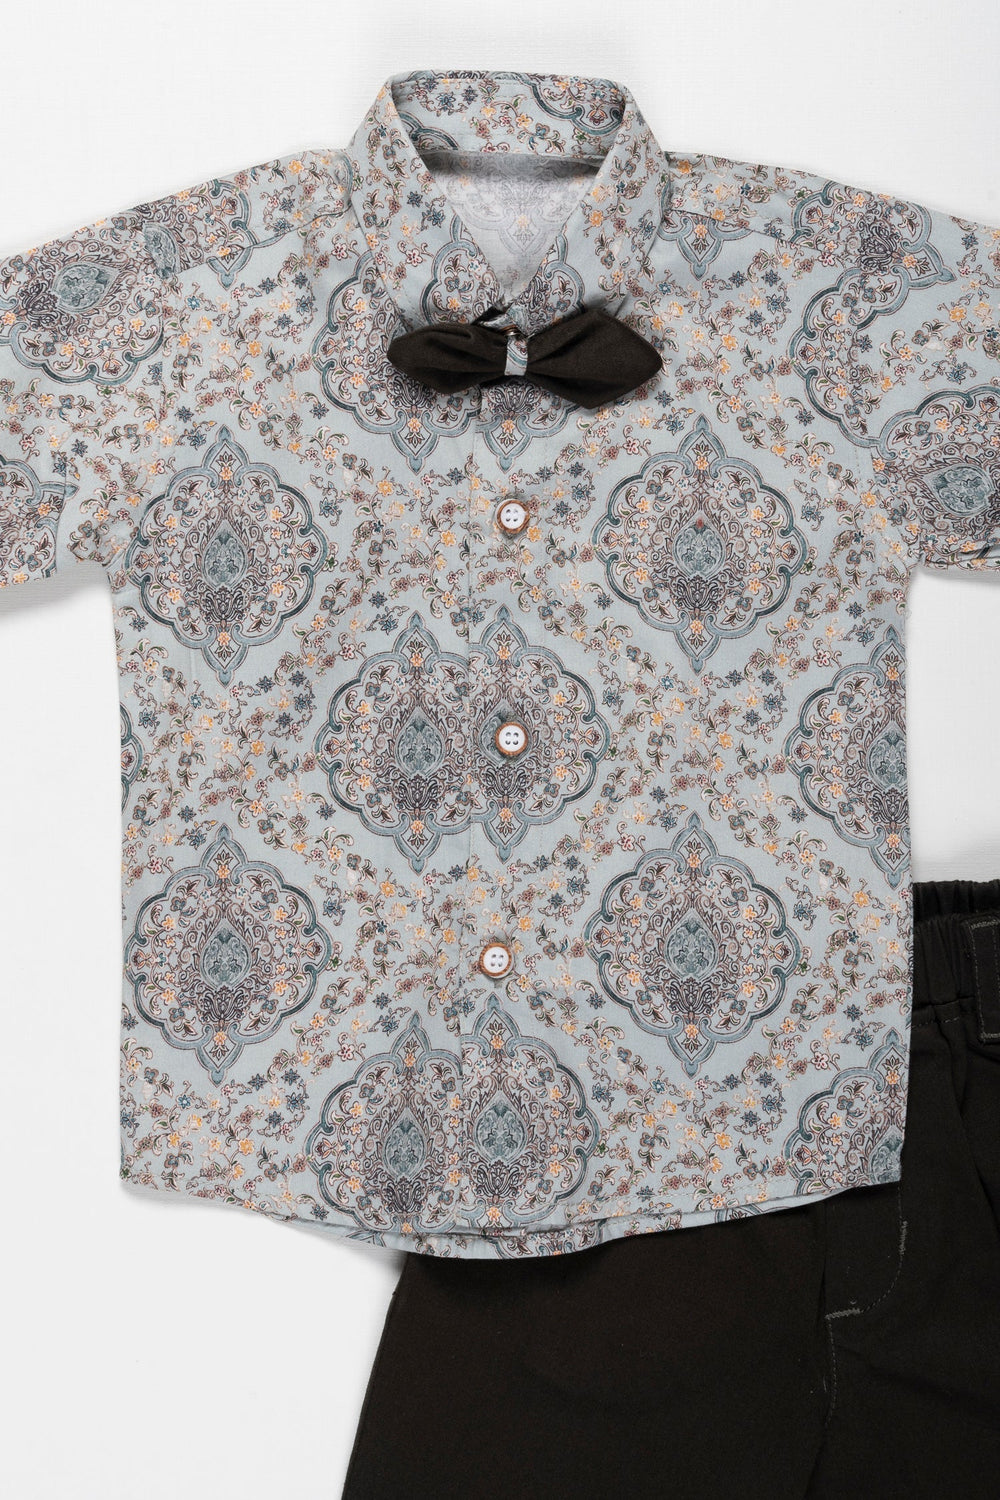 The Nesavu Boys Casual Set Boys Elegant Paisley Shirt with Trousers Set - Ideal for Eid and Ugadi Nesavu Buy Boys Paisley Shirt and Trousers Set | Festive and Casual Wear | The Nesavu